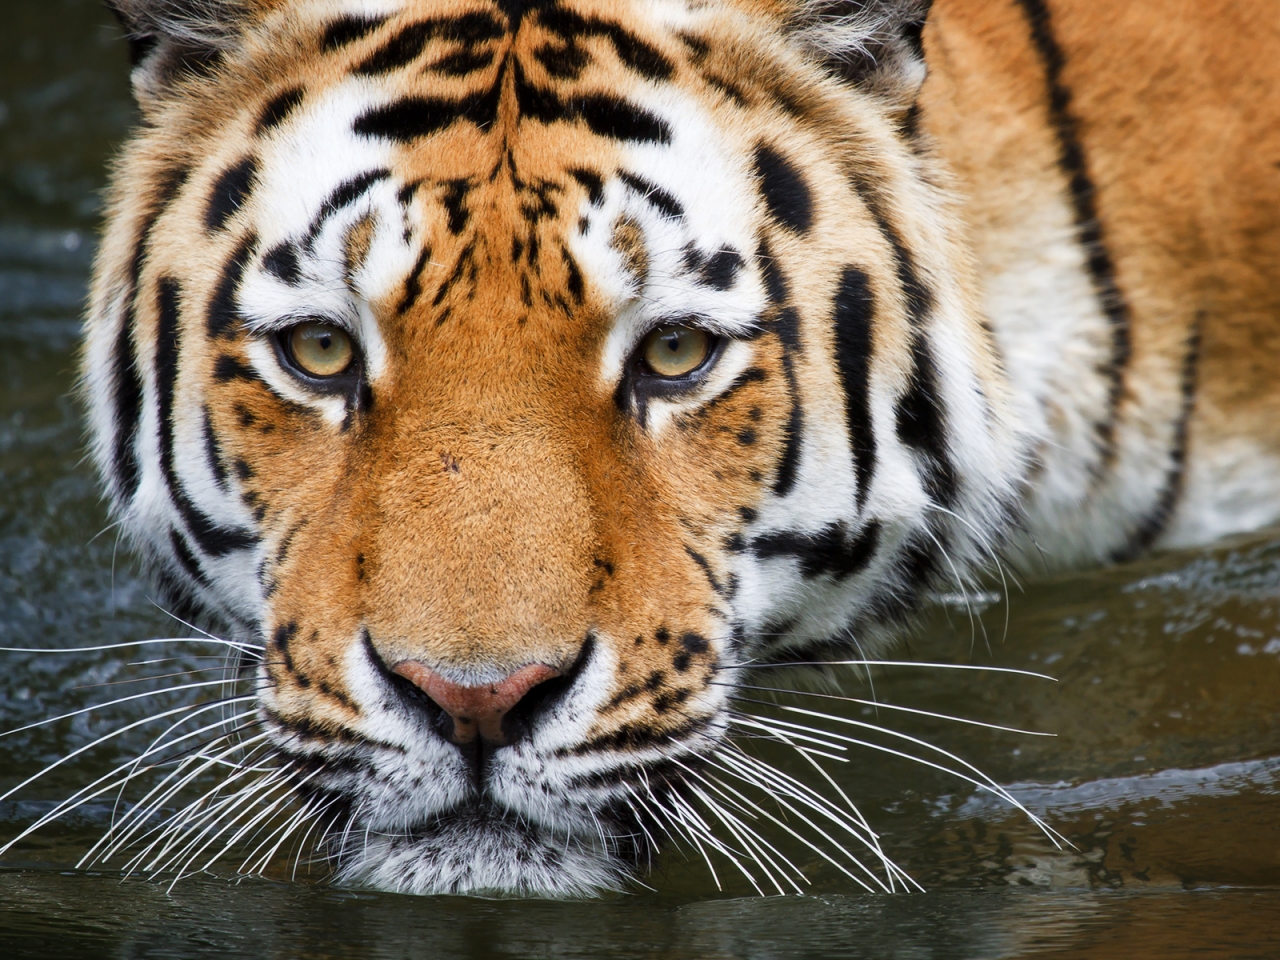 Bathing Tiger for 1280 x 960 resolution